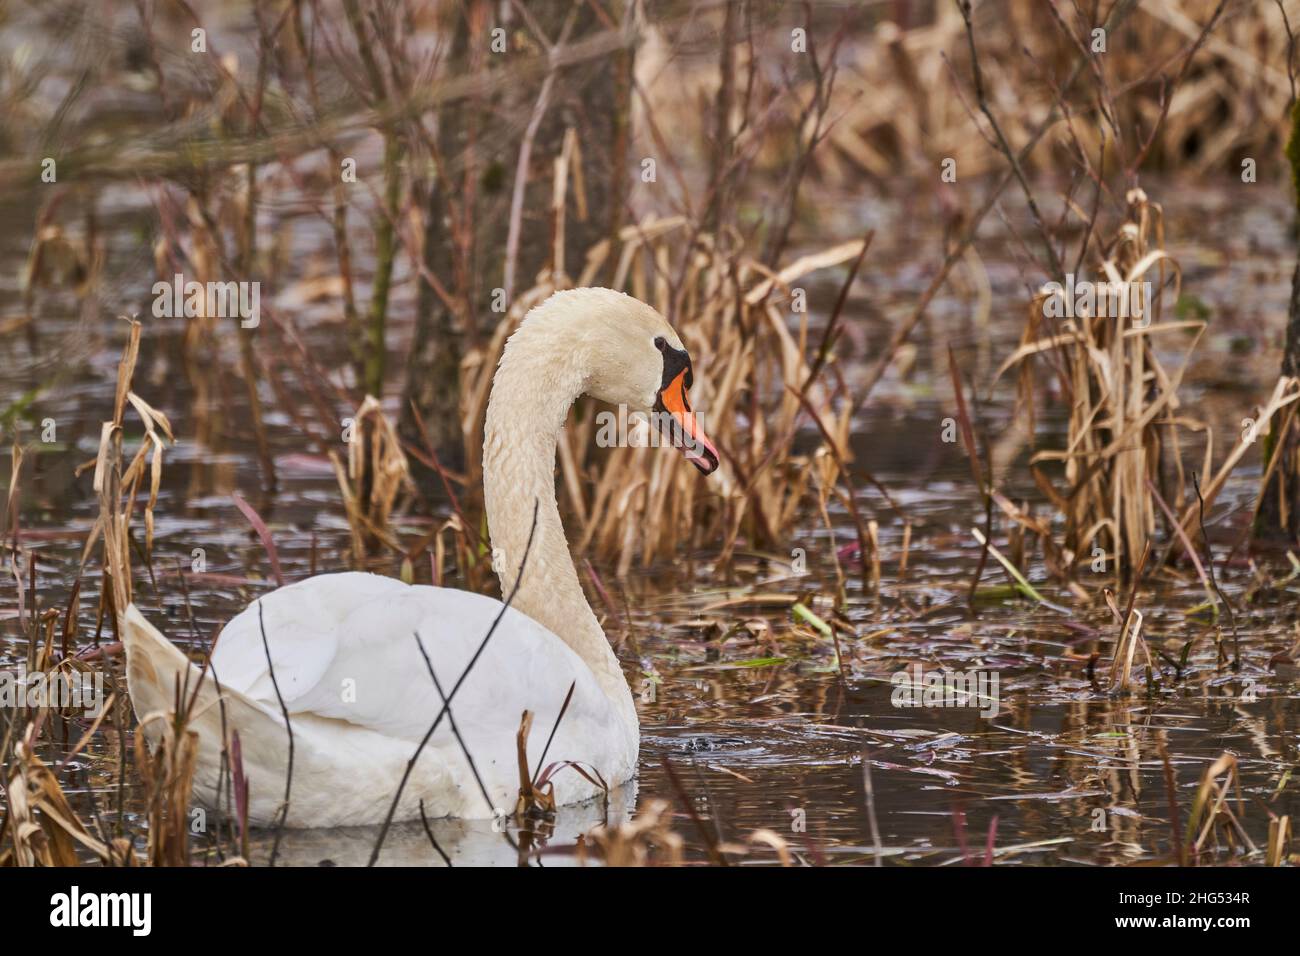 White swans, Cygnus, swimming through reed. Bird species of Anatidae family closely related to geese and ducks. Stock Photo